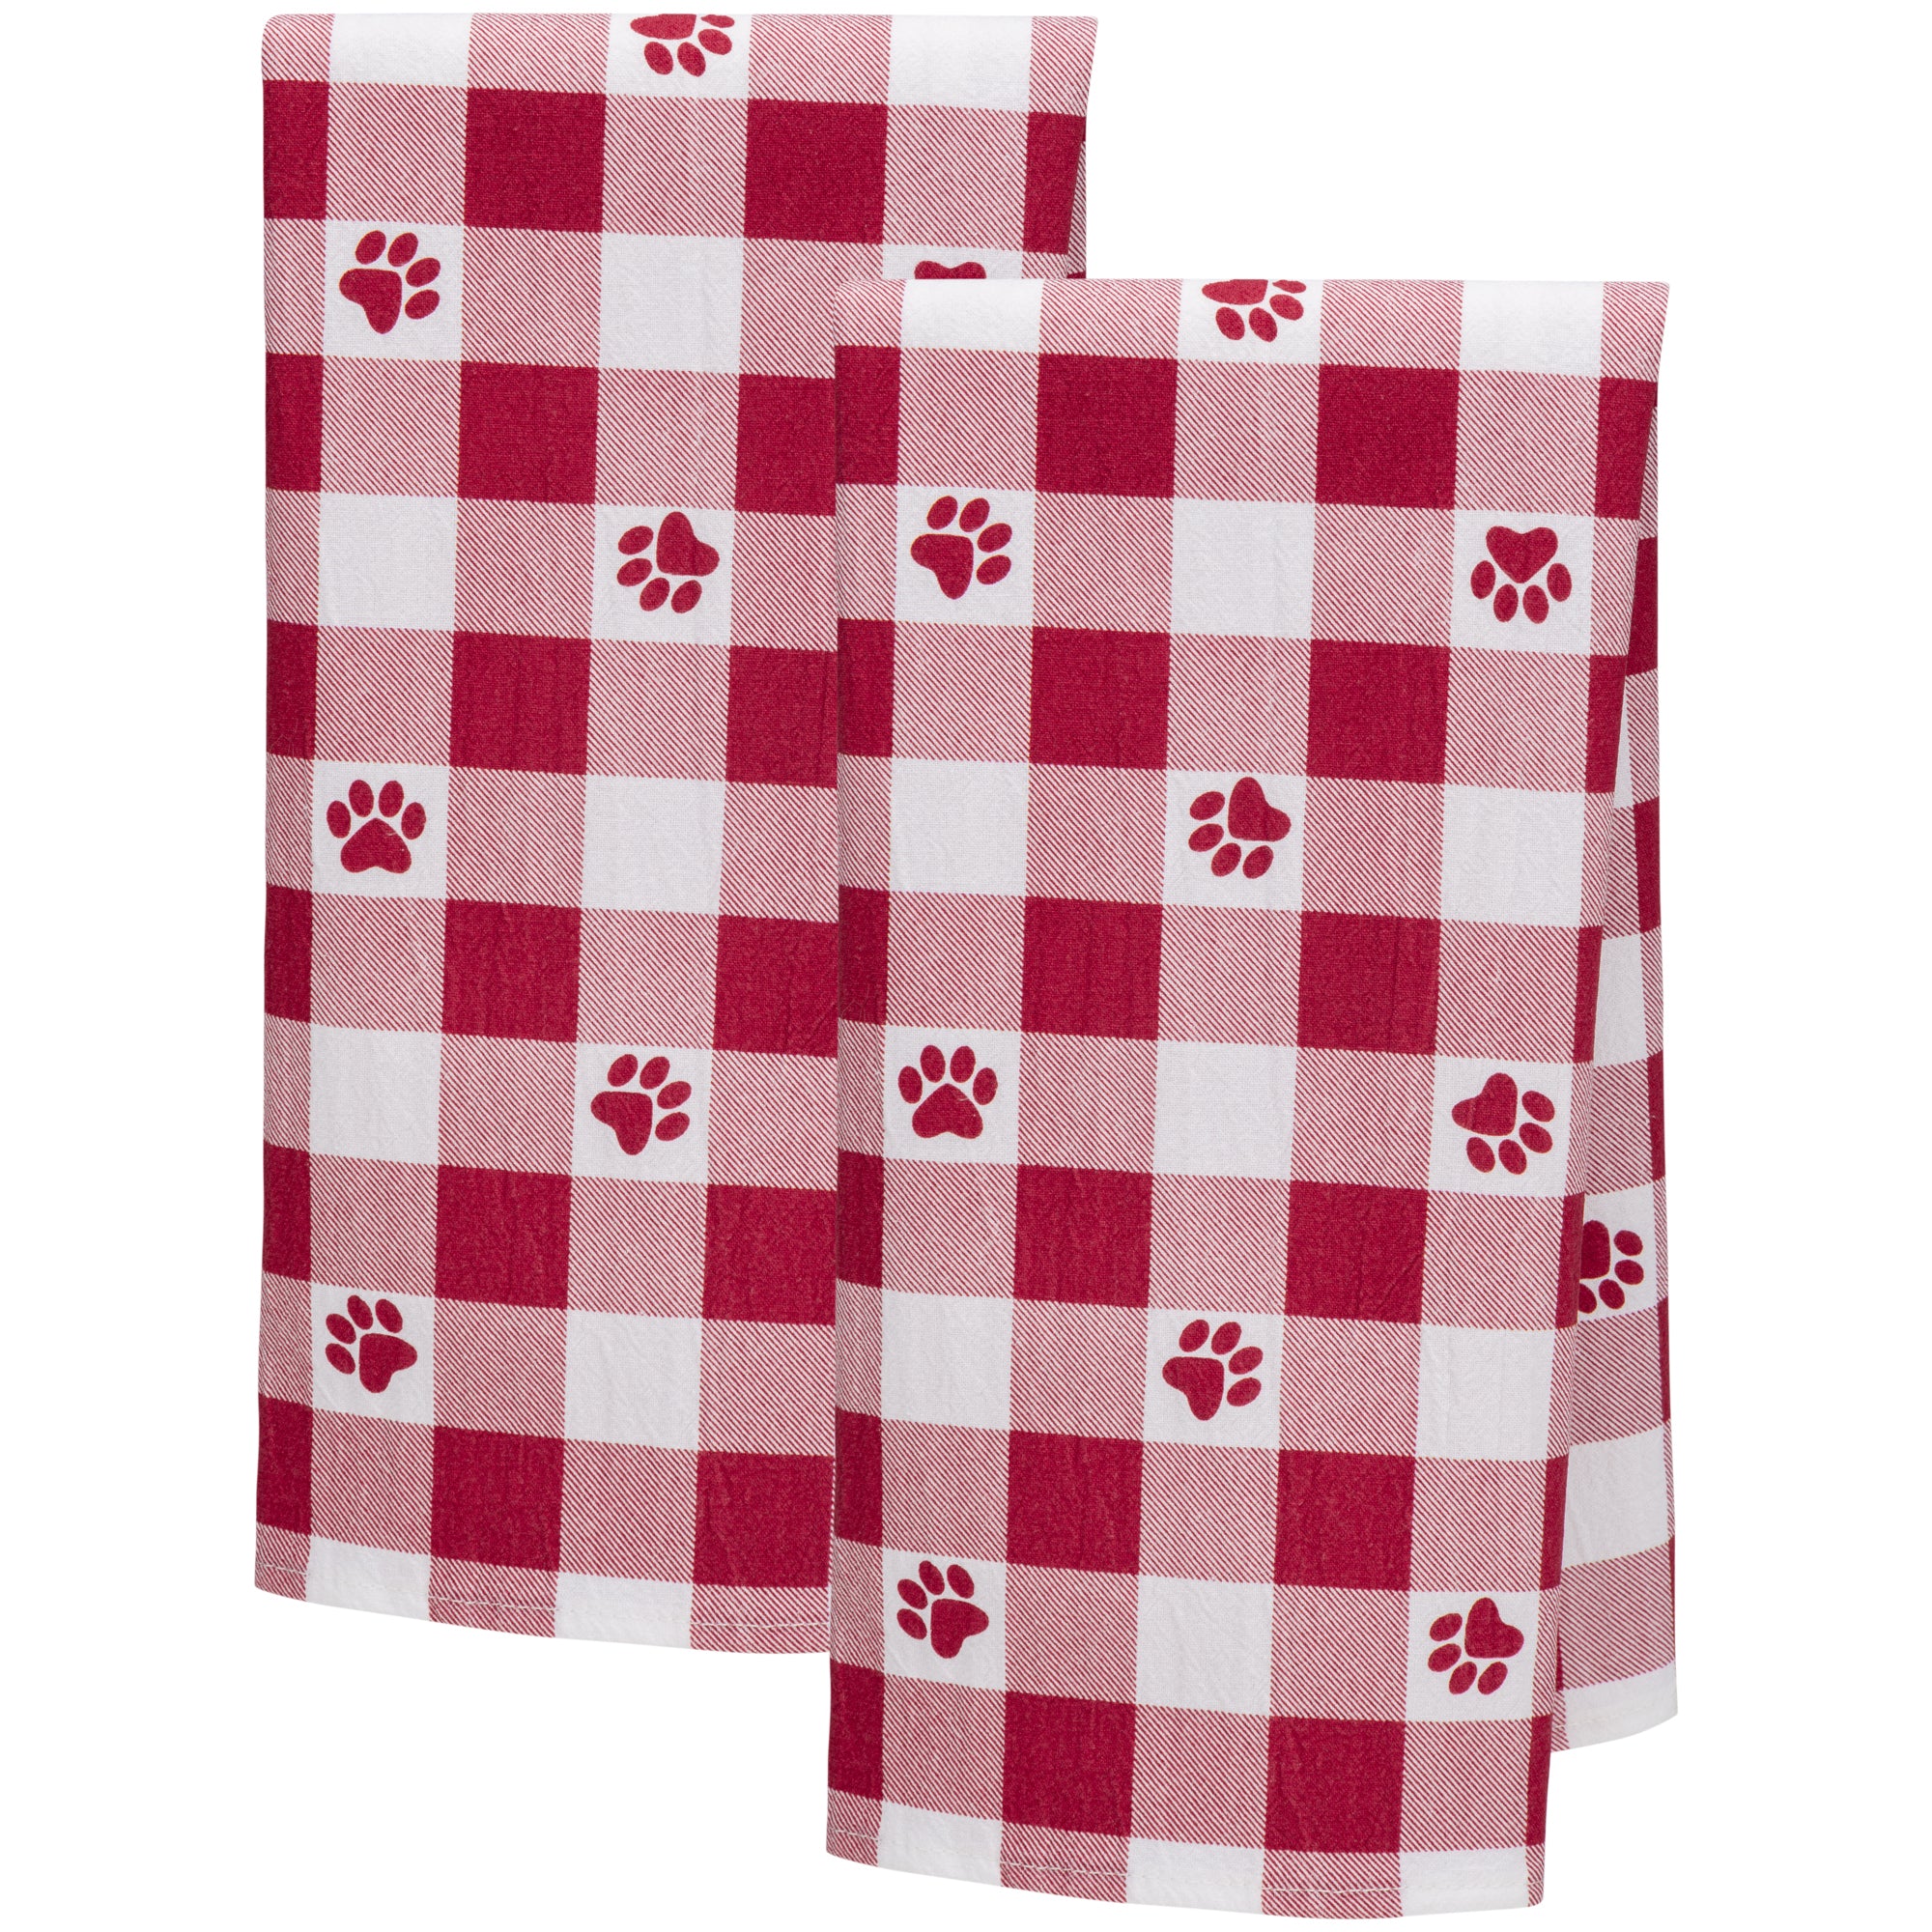 Gingham Plaid Apron, Towels - Red - Kitchen Towel - Set Of 2